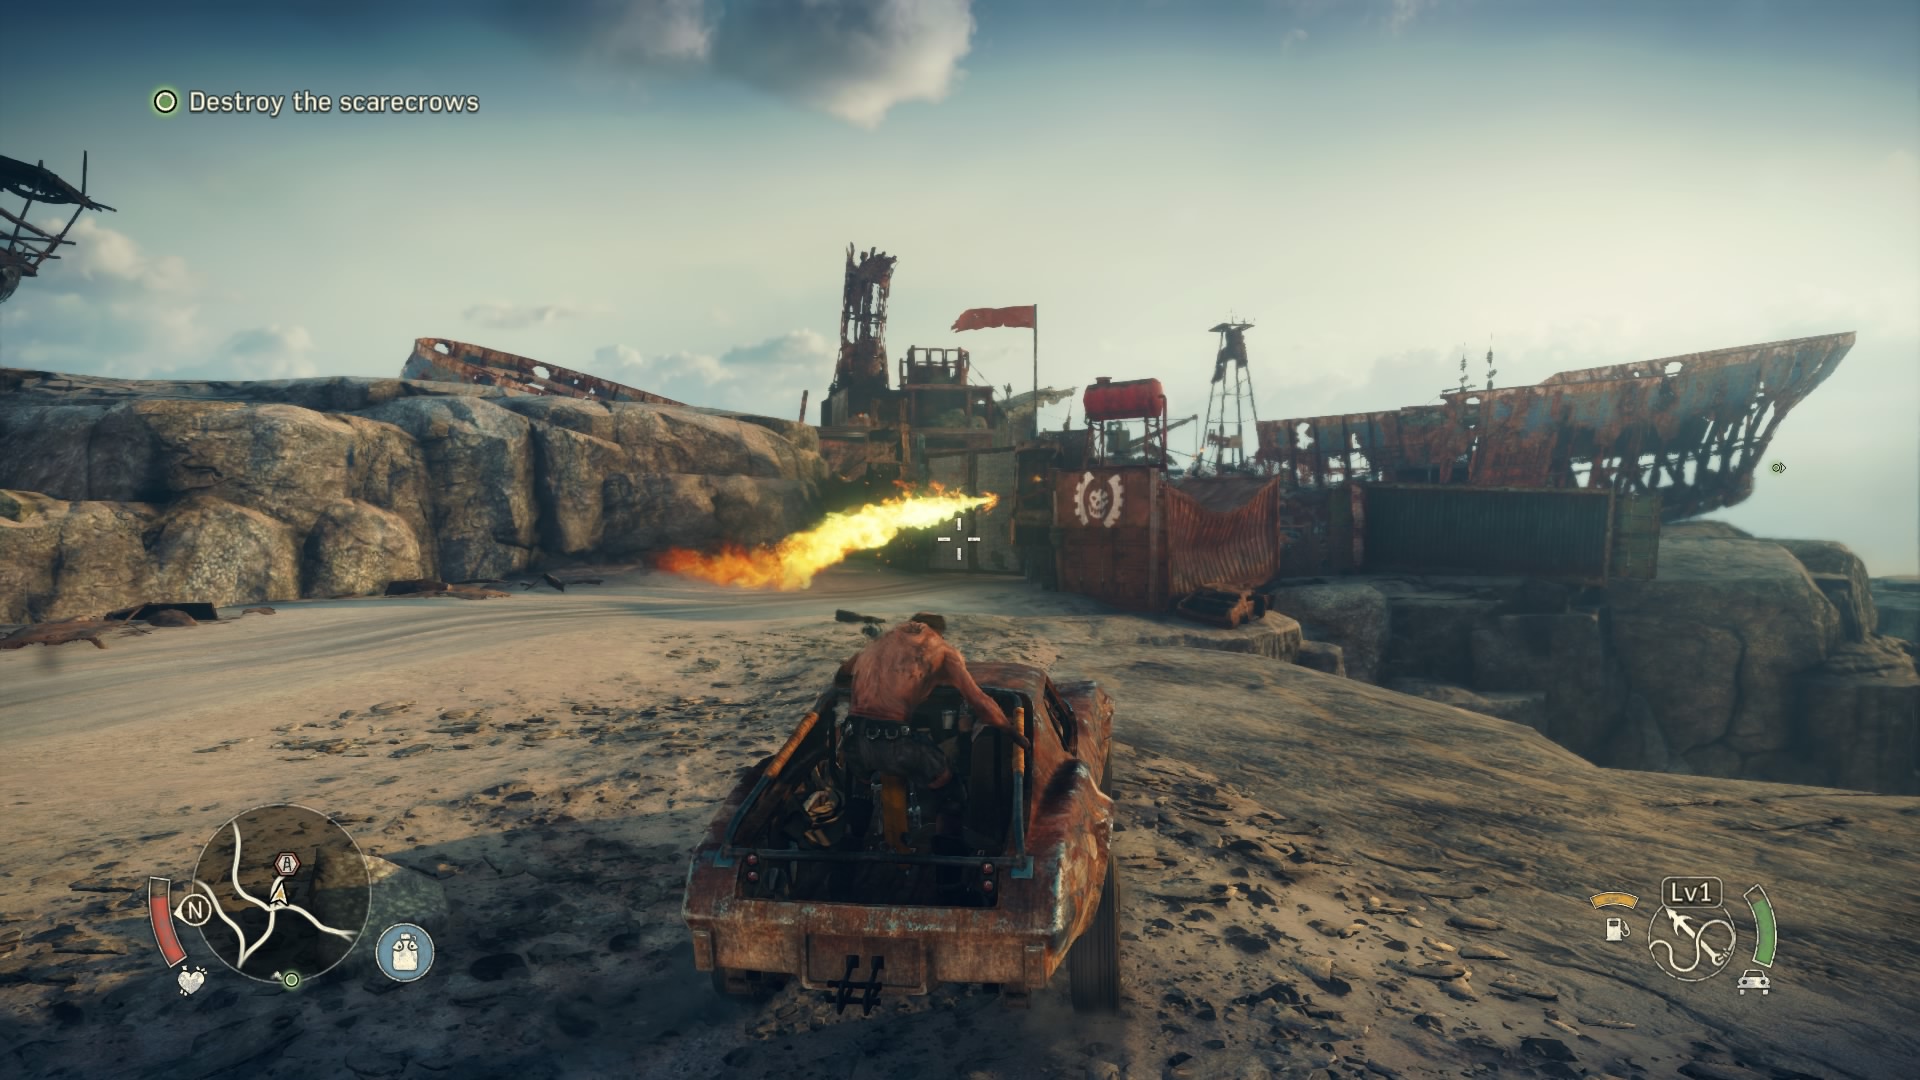 Welcome to the wasteland: Mad Max game review